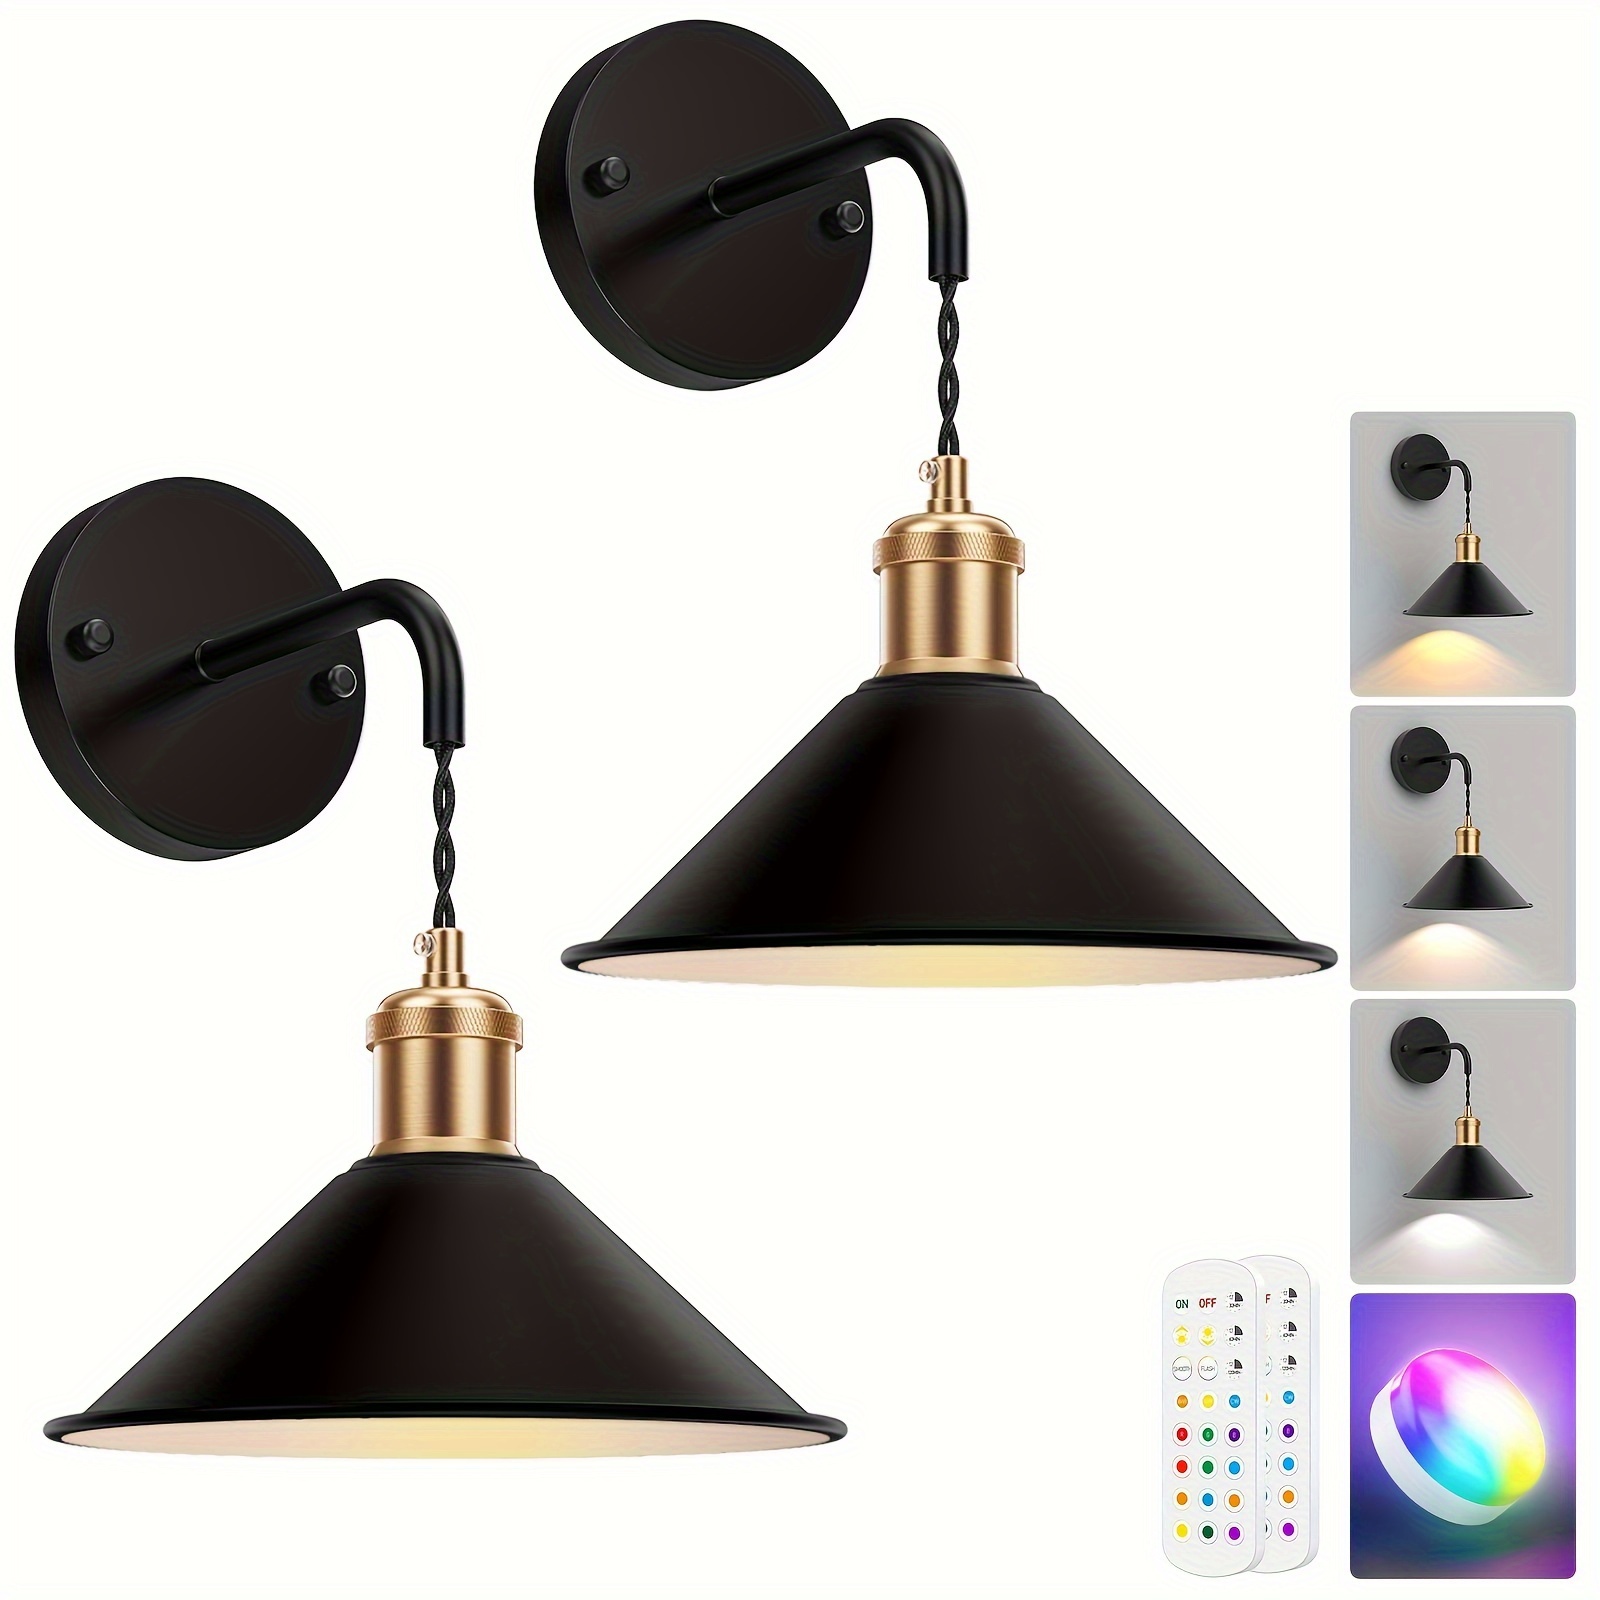 

2pcs Wall Sconces, Battery Rechargeable Rgbw Color Changeable Dimmable Wall Lights Fixtures With Remote Control Fabric Height Wall Lamp Sconces For Bedroom Living Room Hallway